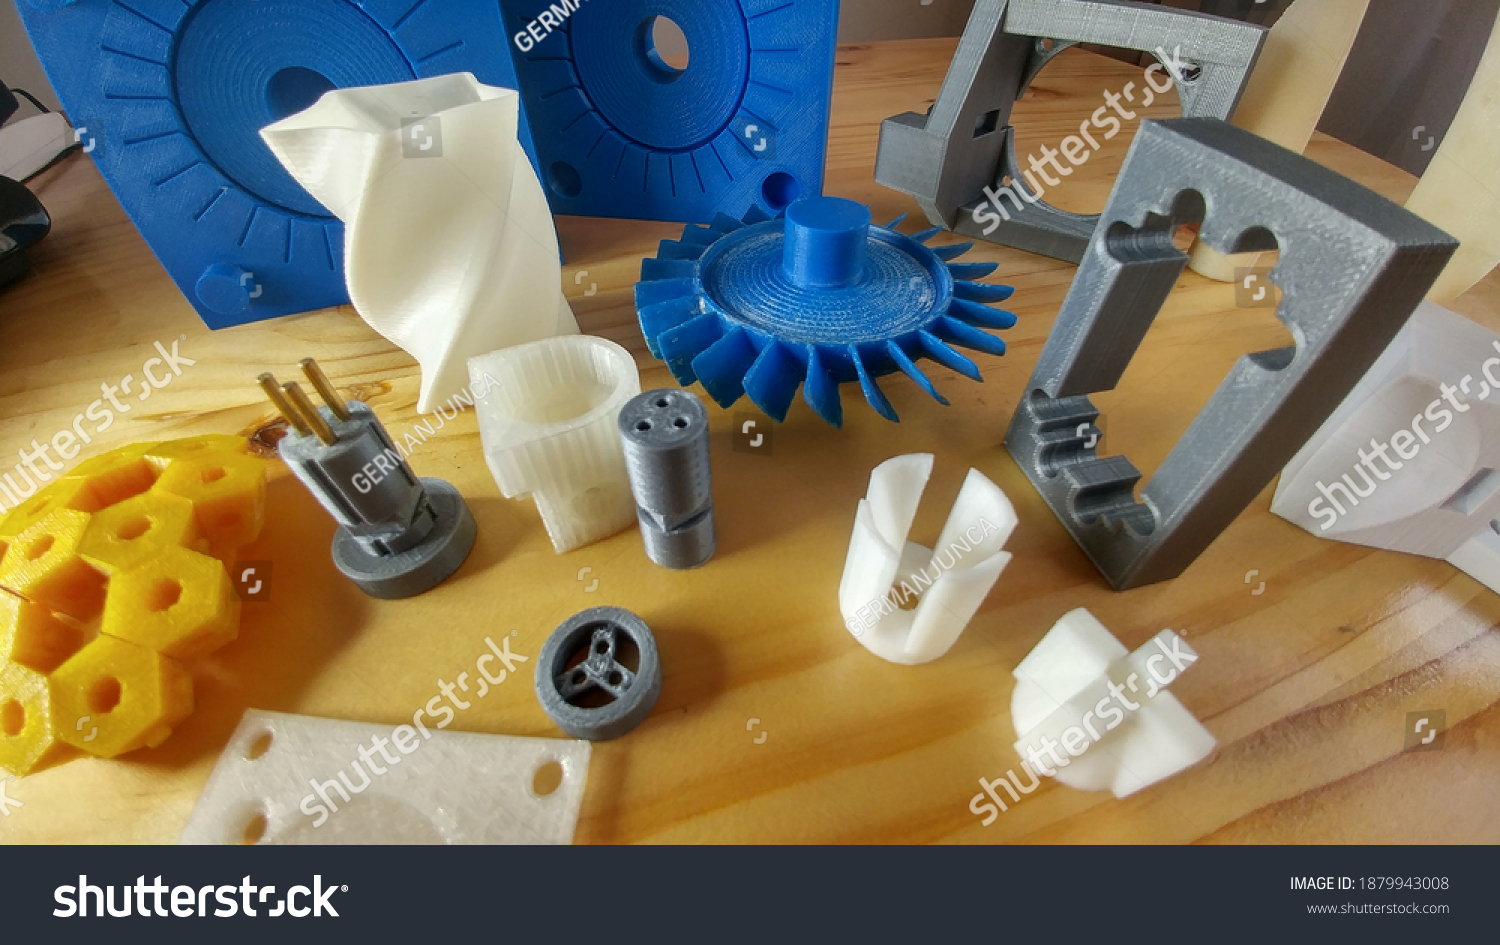 3d print, mechanical components in 3d printing, in thermoplastic plastic polymer, industrial  design. #1879943008